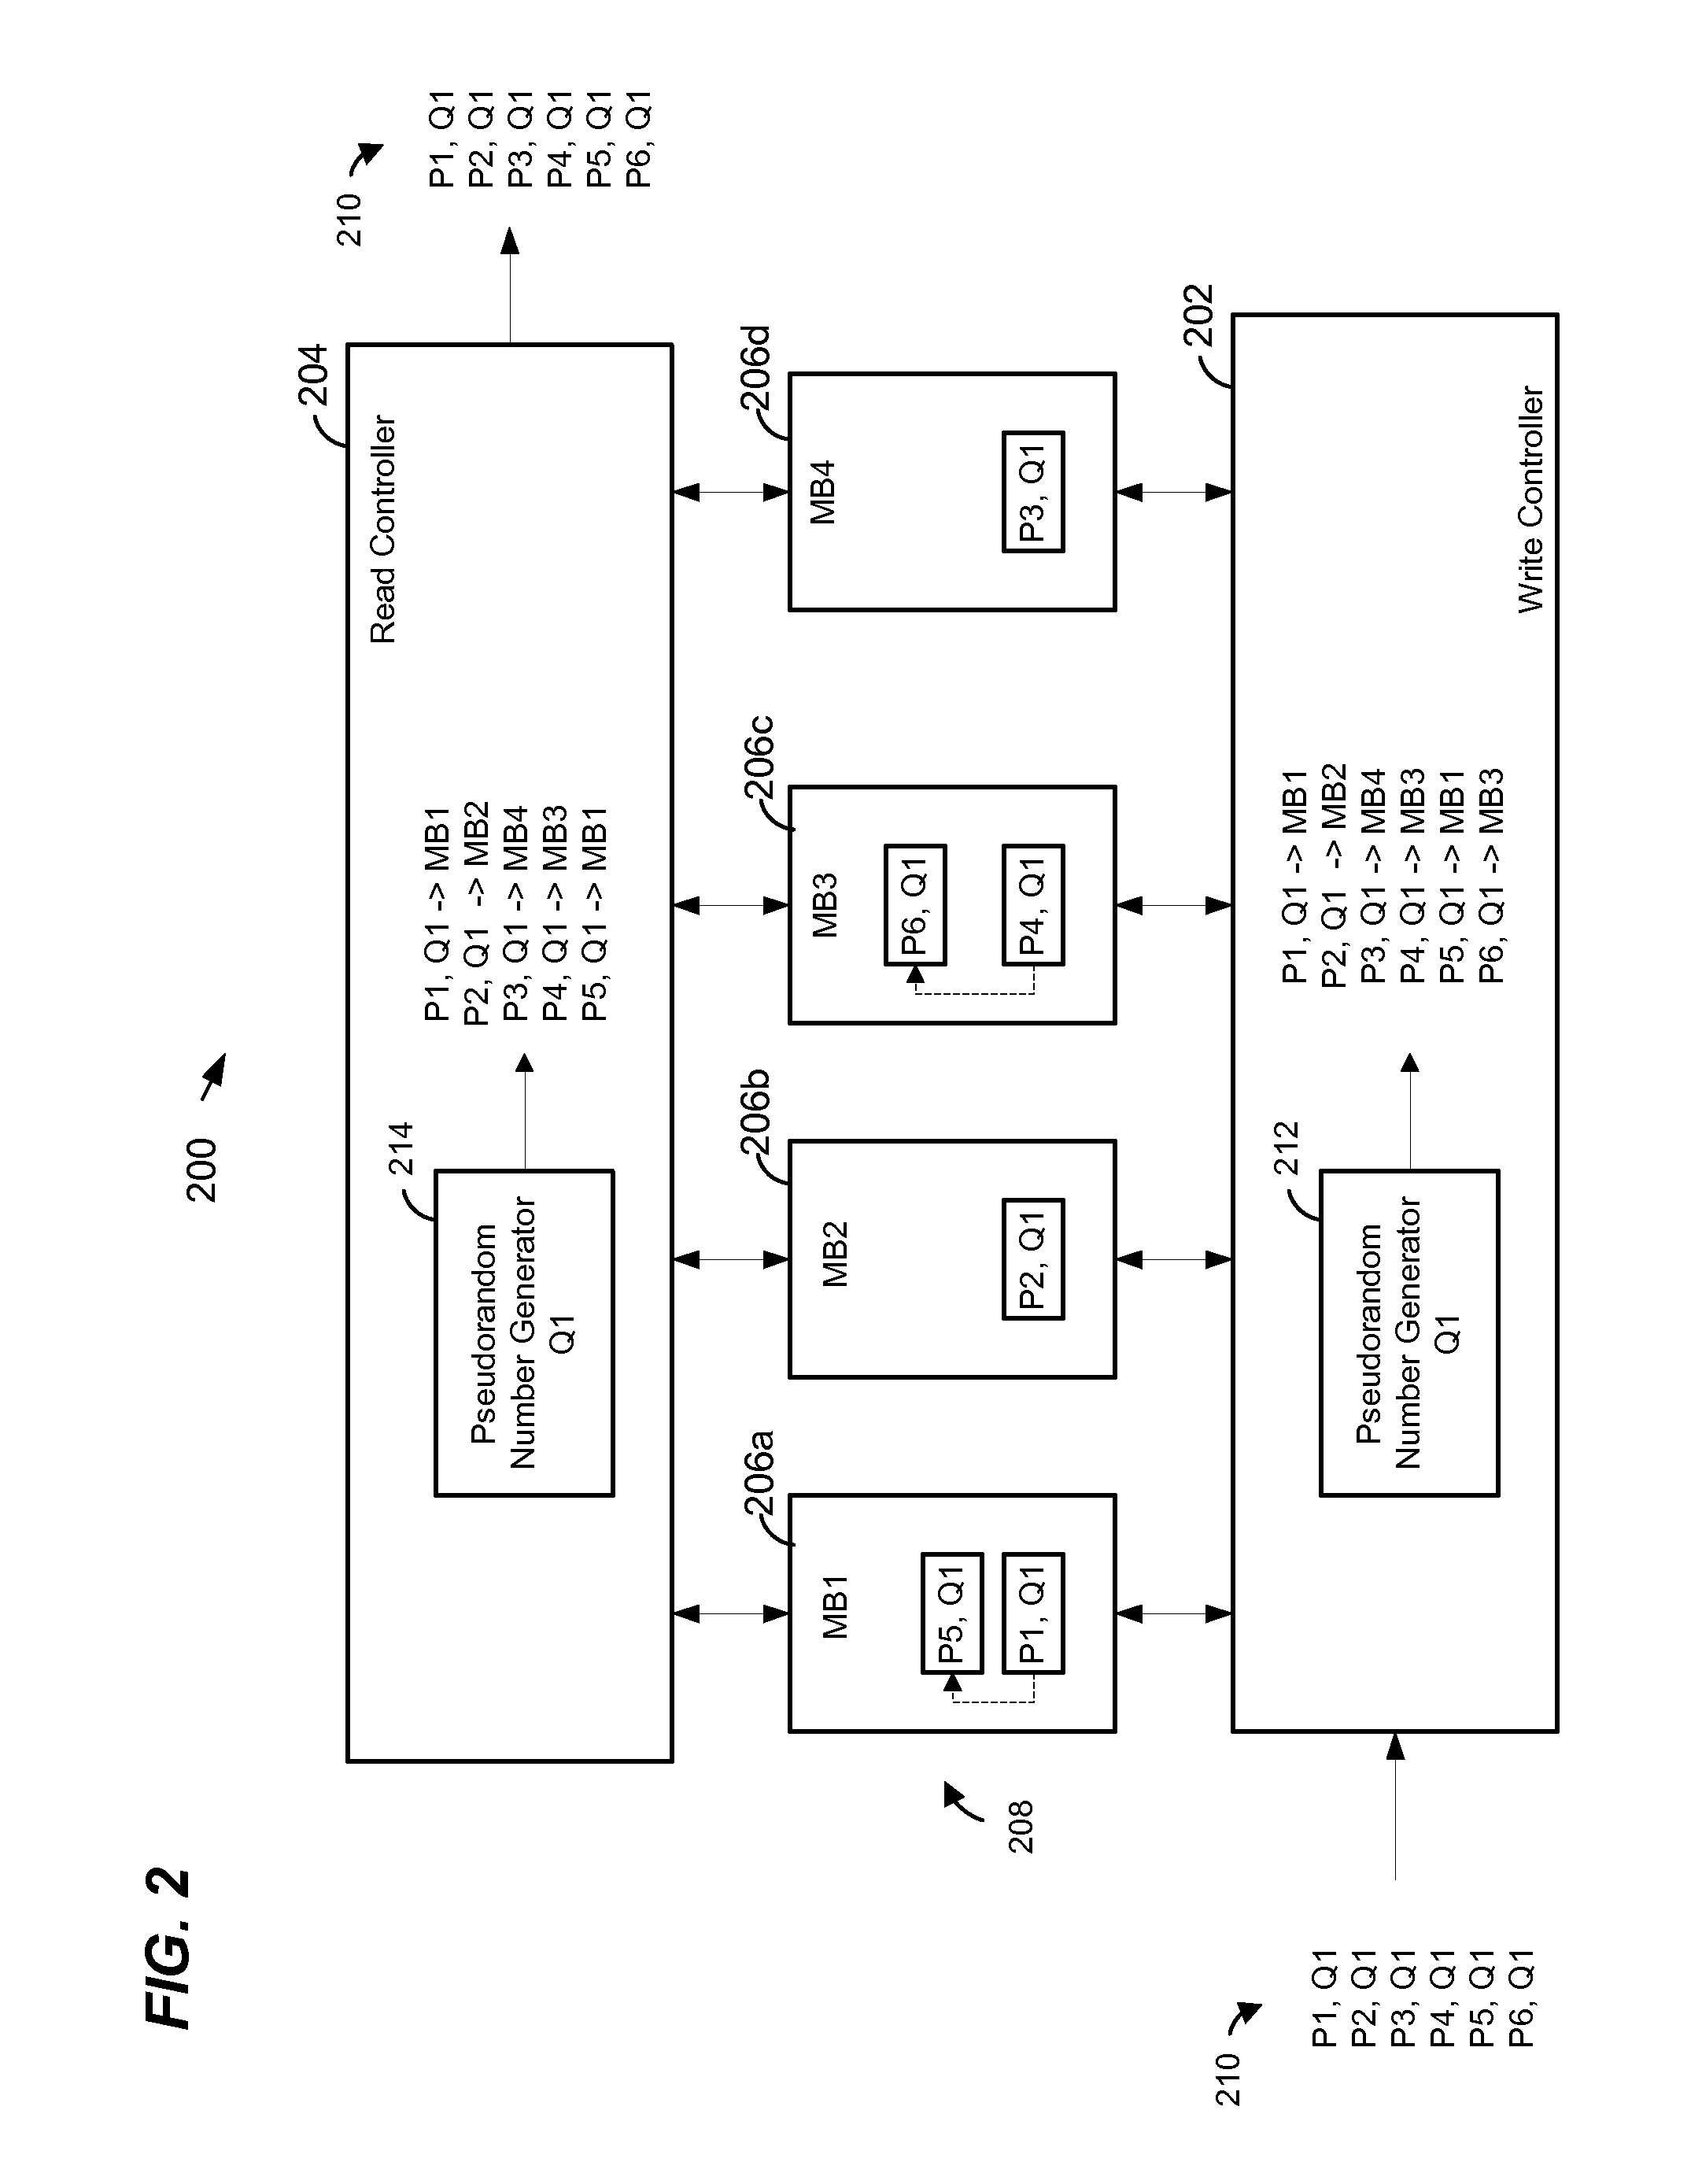 Multibank egress queuing system in a network device